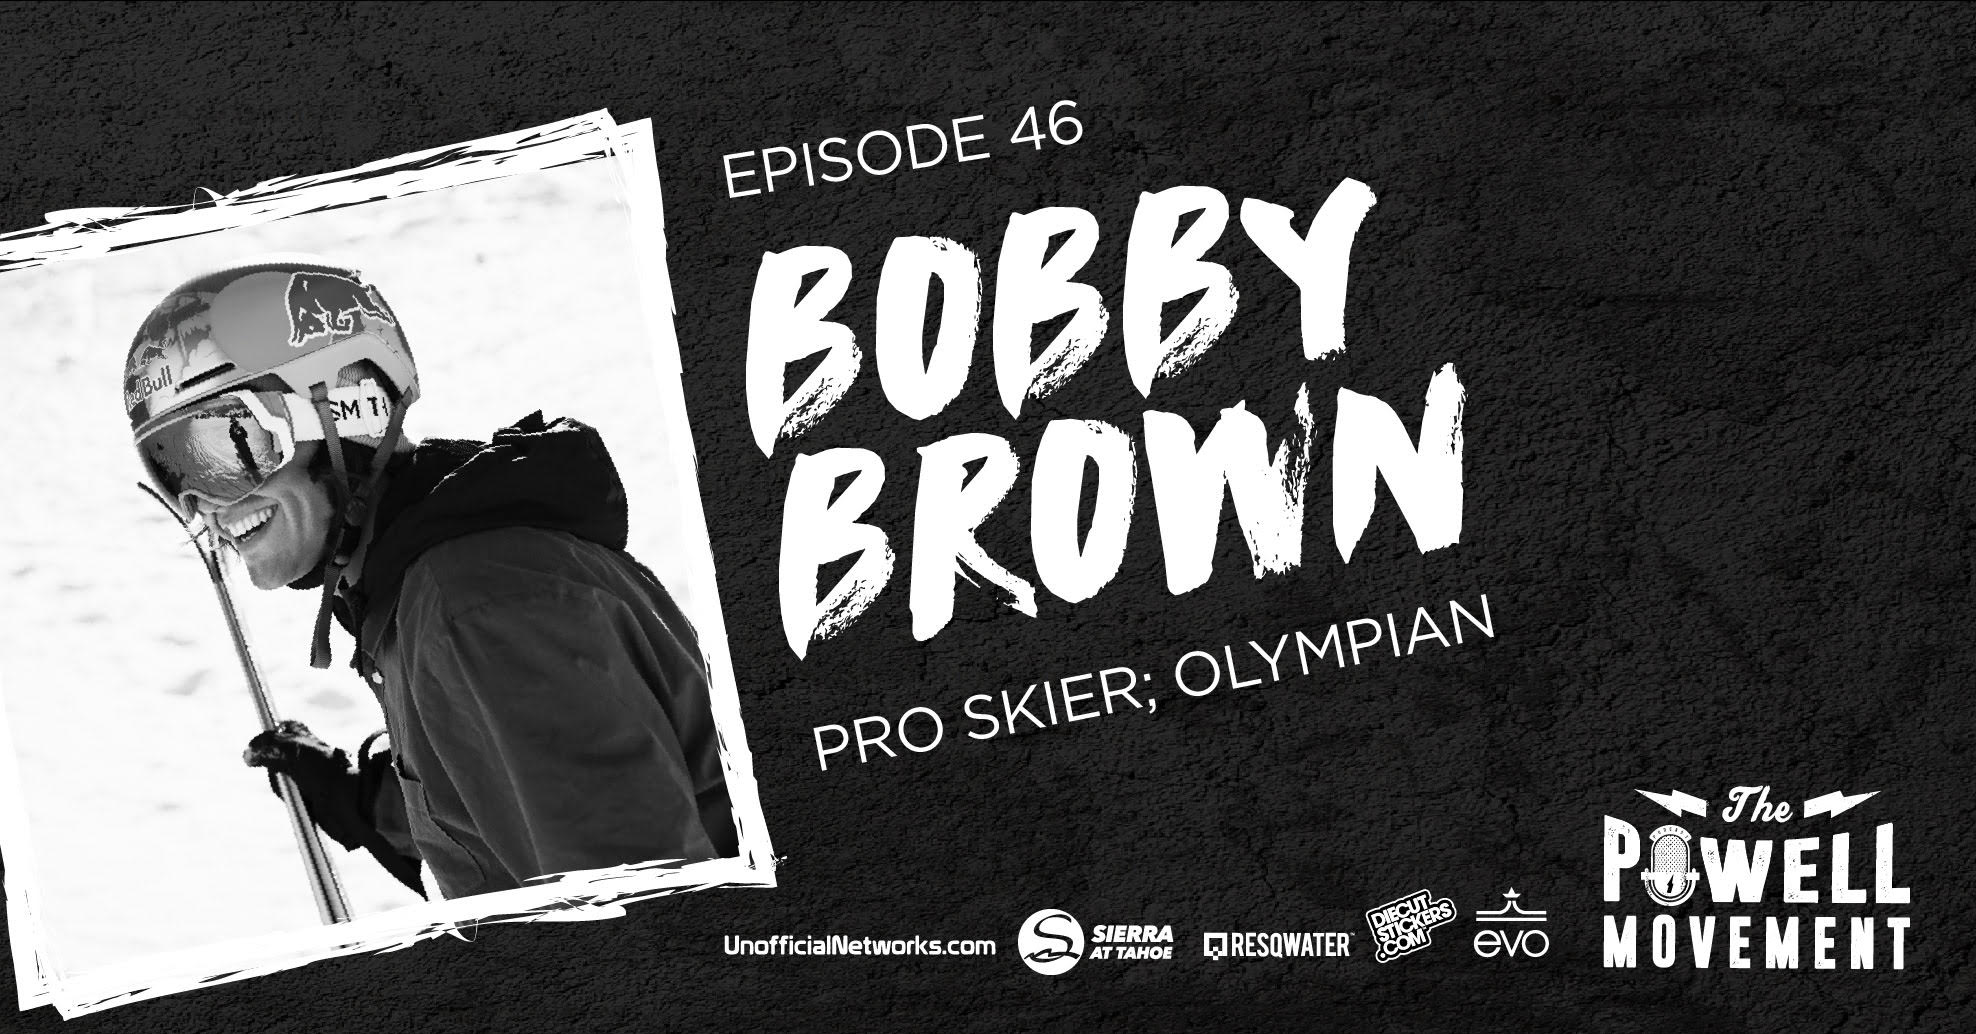 Bobby Brown Regrets Sochi, Looks Forward To Pyeongchang Redemption